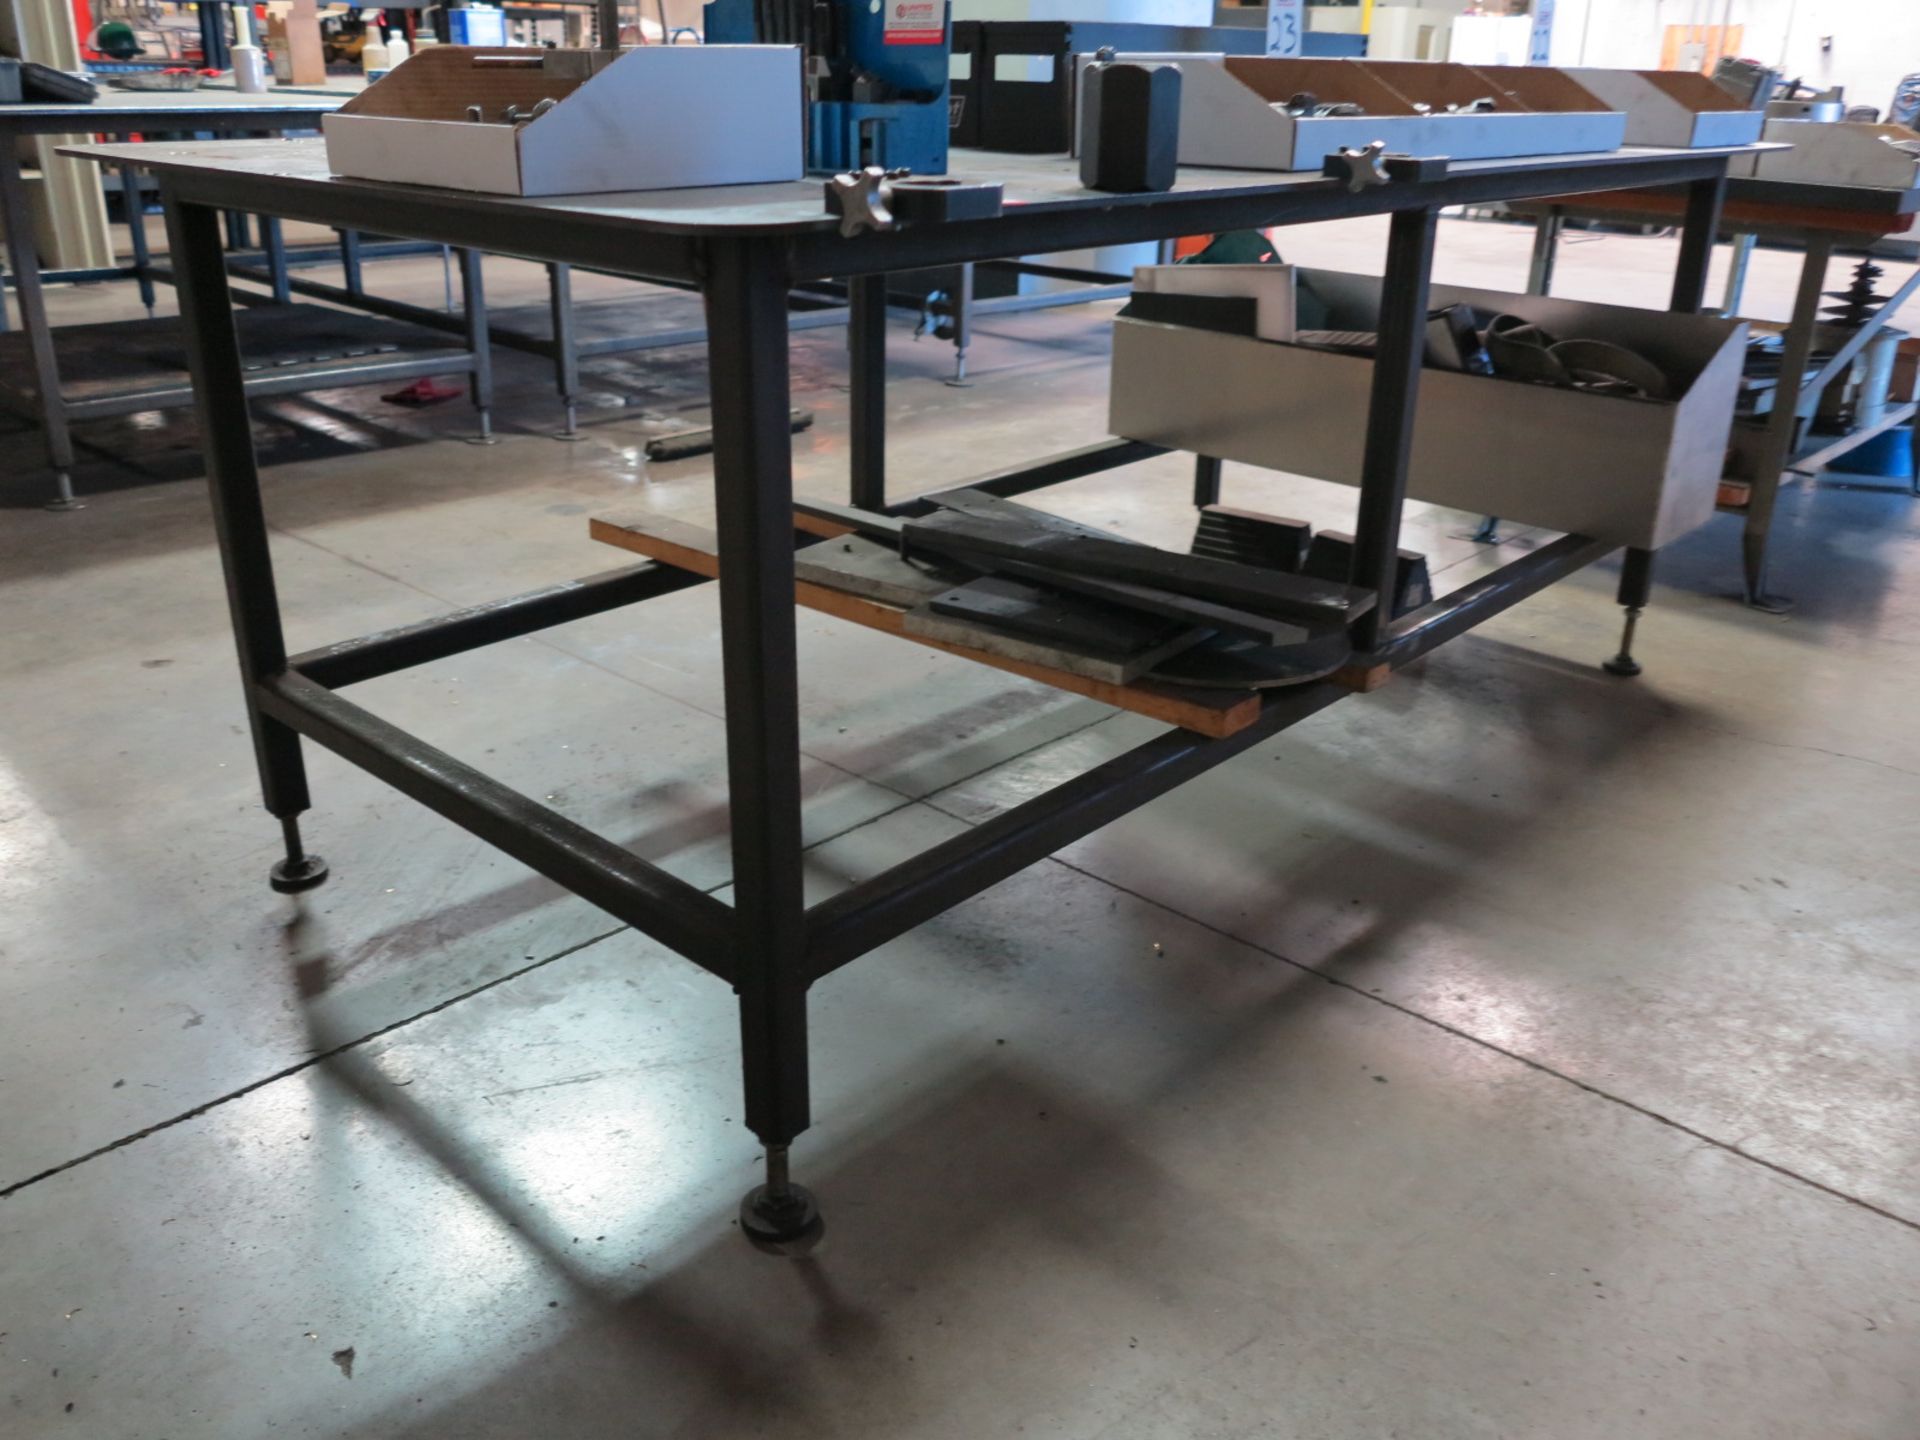 8' X 4' STEEL TABLE, TOP IS 5/16" THICK